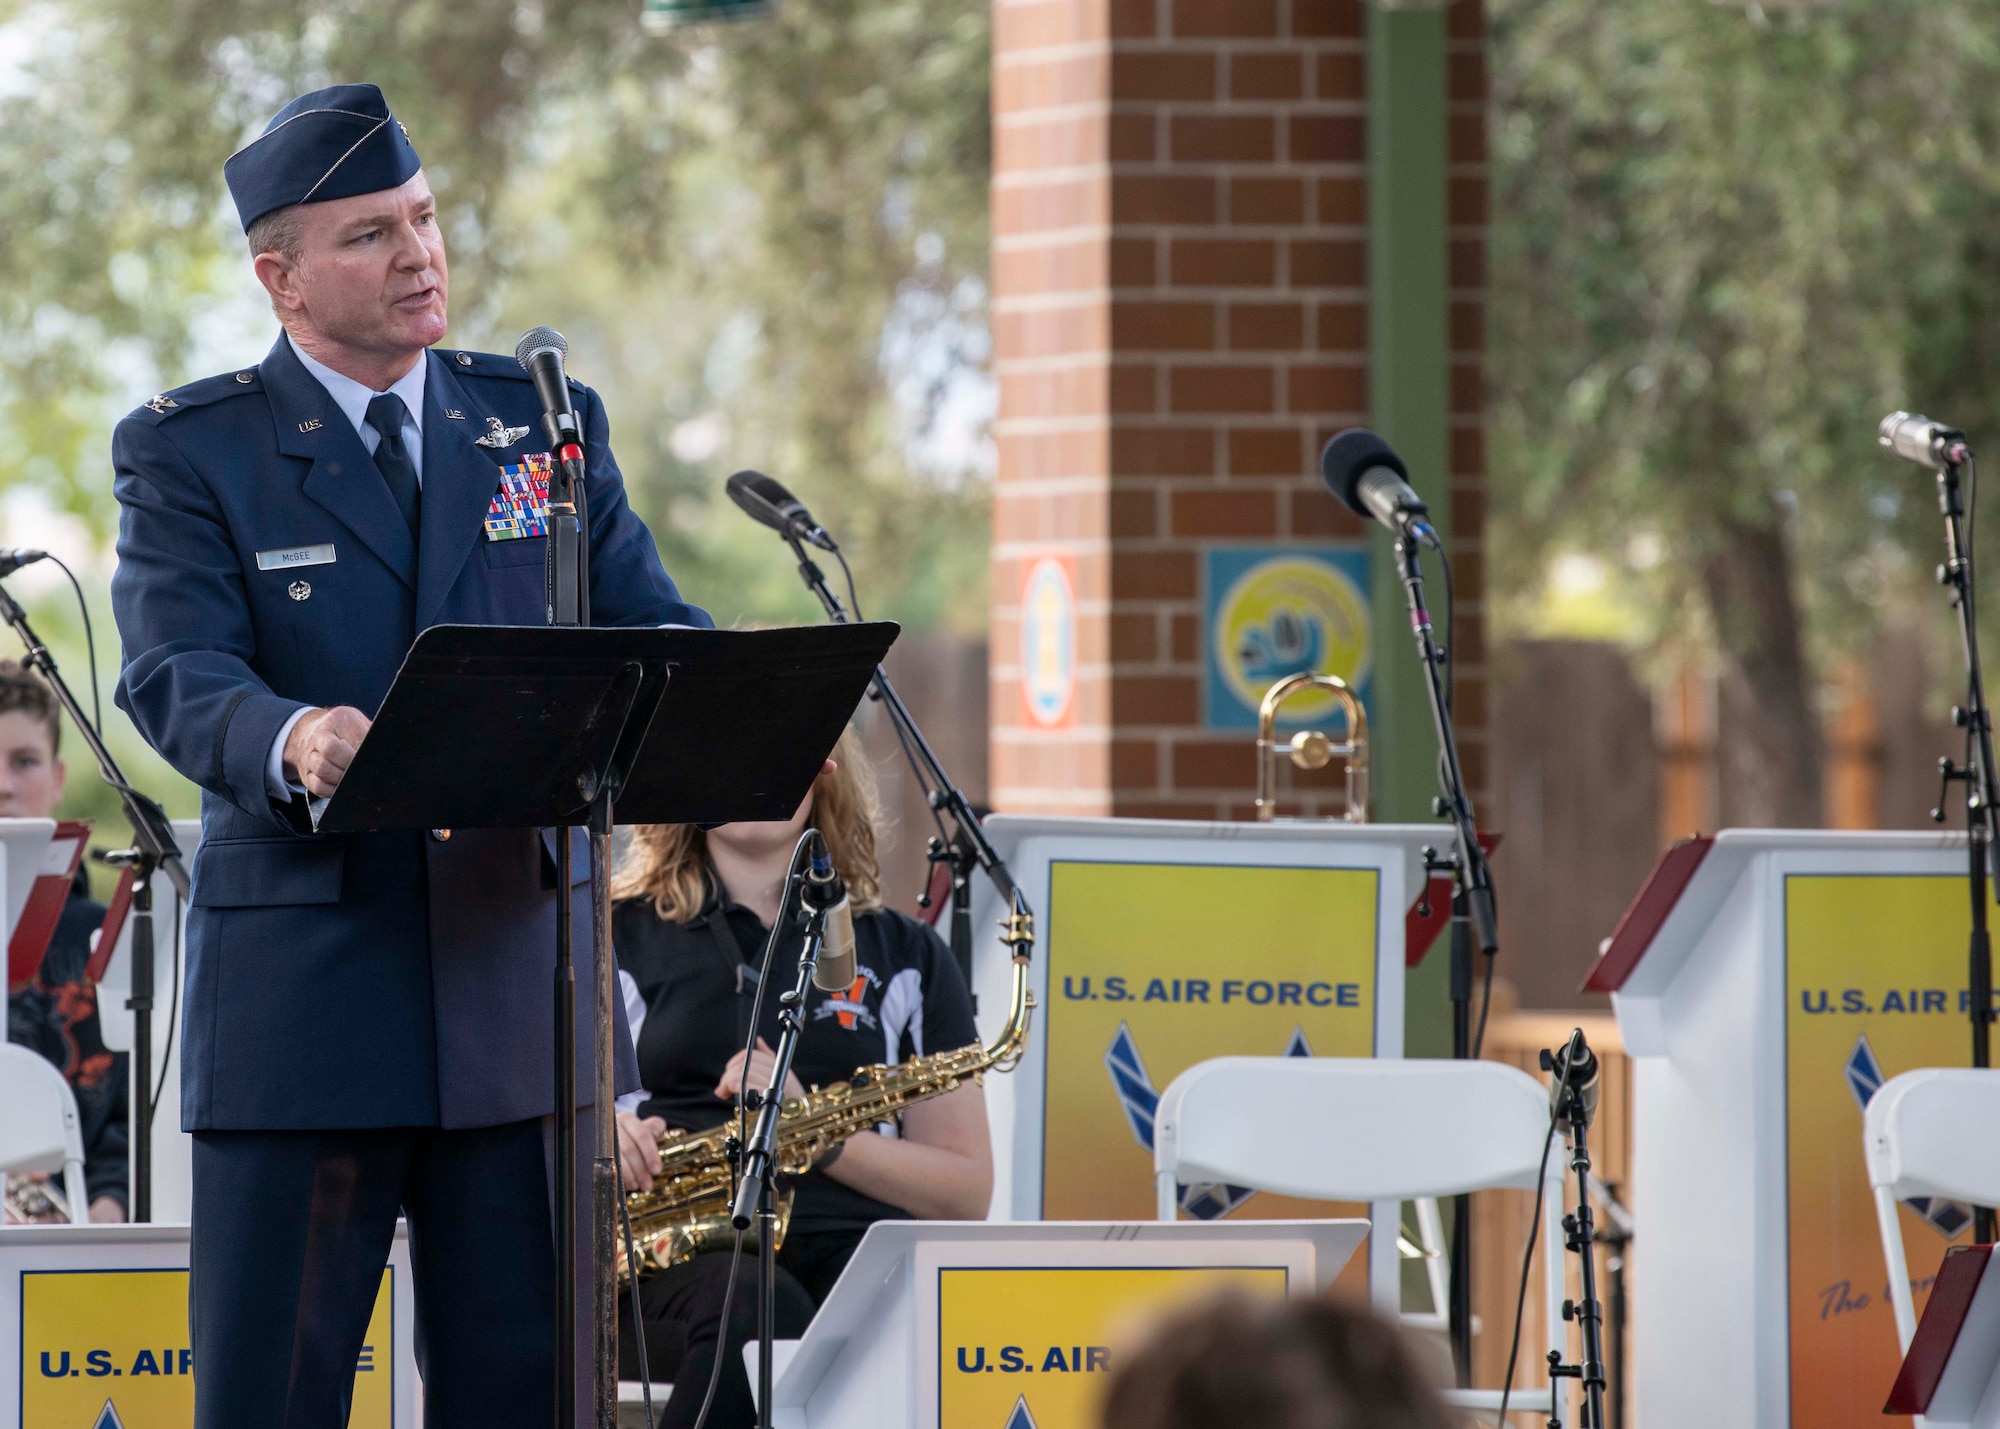 Col. Terrence McGee, 349th Air Mobility Wing vice commander, addresses the audience during a POW/MIA tribute ceremony, Sept. 18, 2022, in Vacaville, California.  National POW/MIA Recognition Day is observed on the third Friday in September to honor those who were prisoners of war and those who are still missing in action.